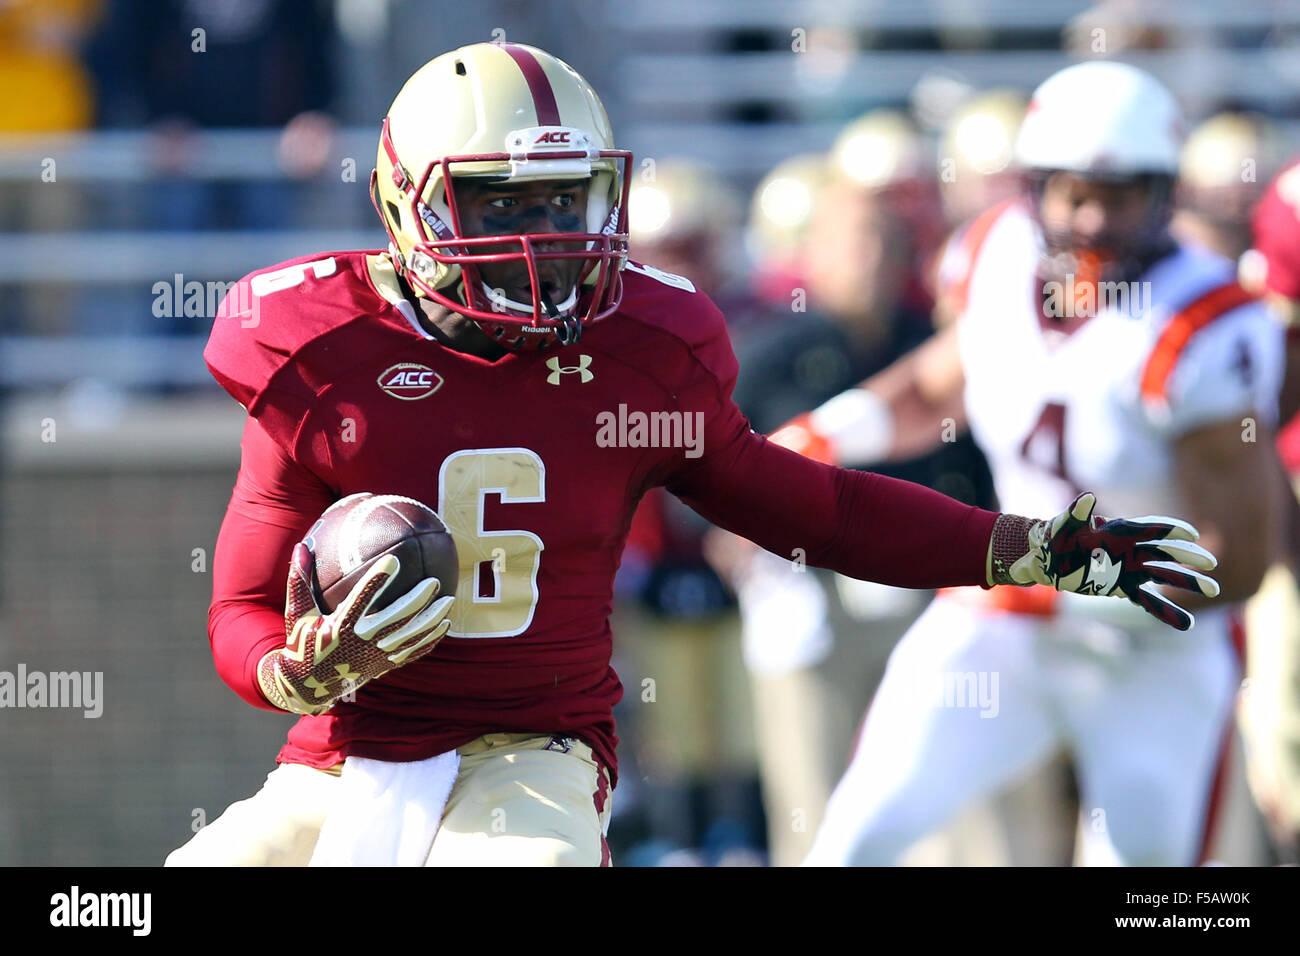 Alumni Stadium. 31st Oct, 2015. MA, USA; Boston College Eagles wide receiver Sherman Alston (6) returns a punt during the first half of the NCAA football game between the Boston College Eagles and Virginia Tech Hokies at Alumni Stadium. Virginia Tech defeated Boston College 26-10. Anthony Nesmith/Cal Sport Media/Alamy Live News Stock Photo